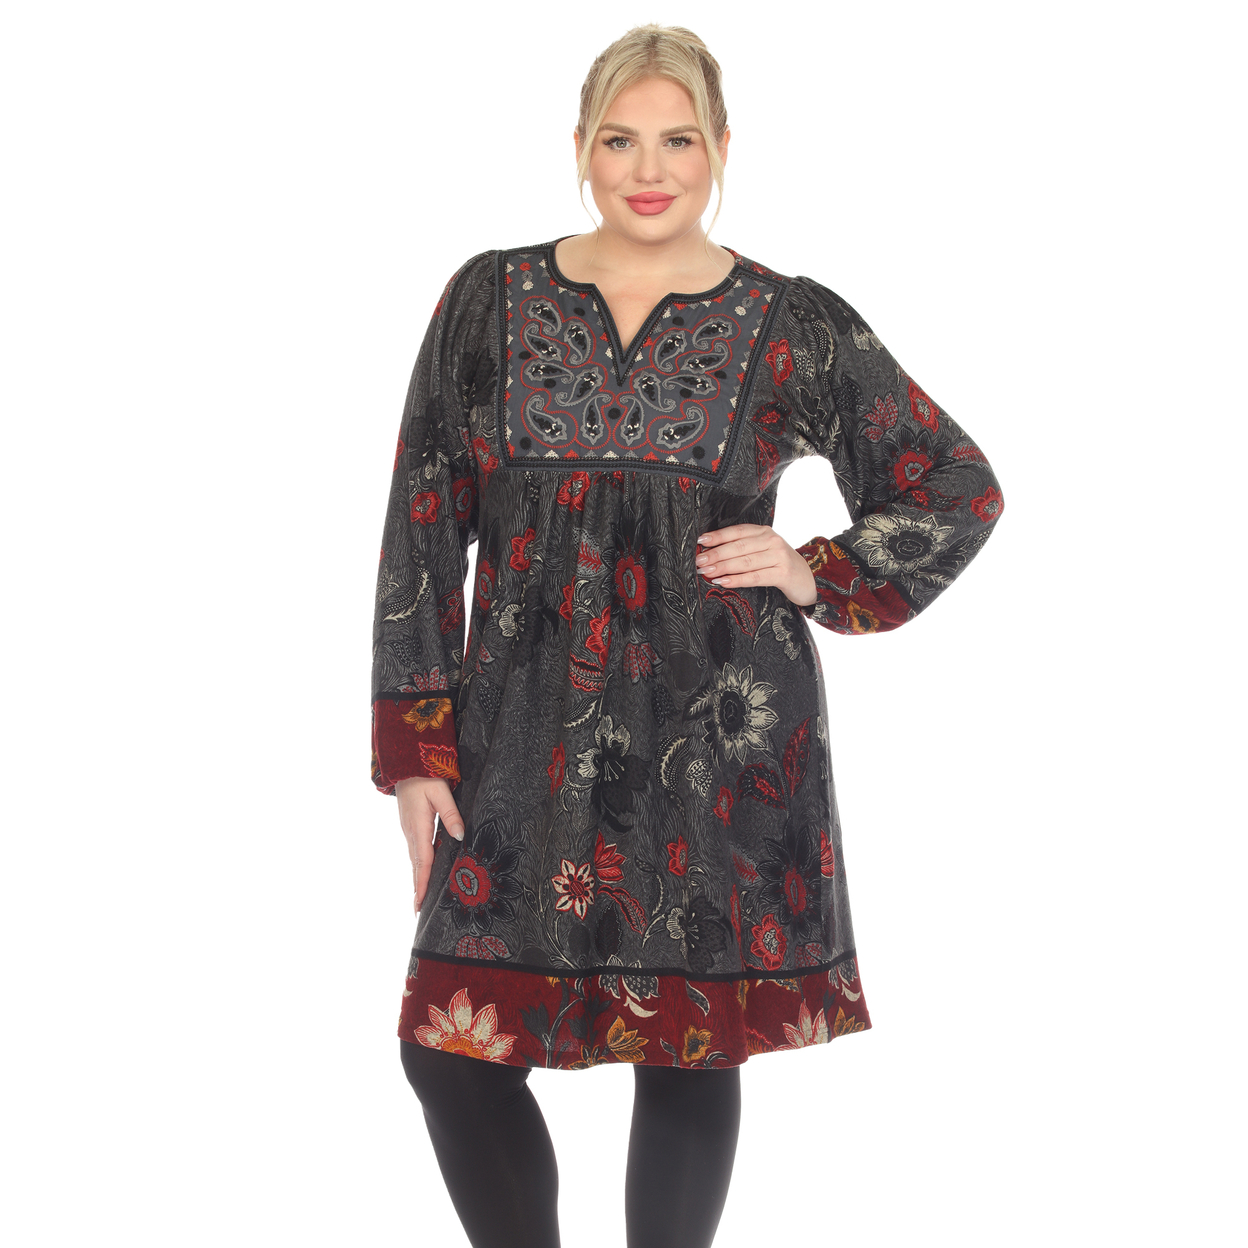 White Mark Women's Floral Paisley Sweater Dress - Grey/red, 1x